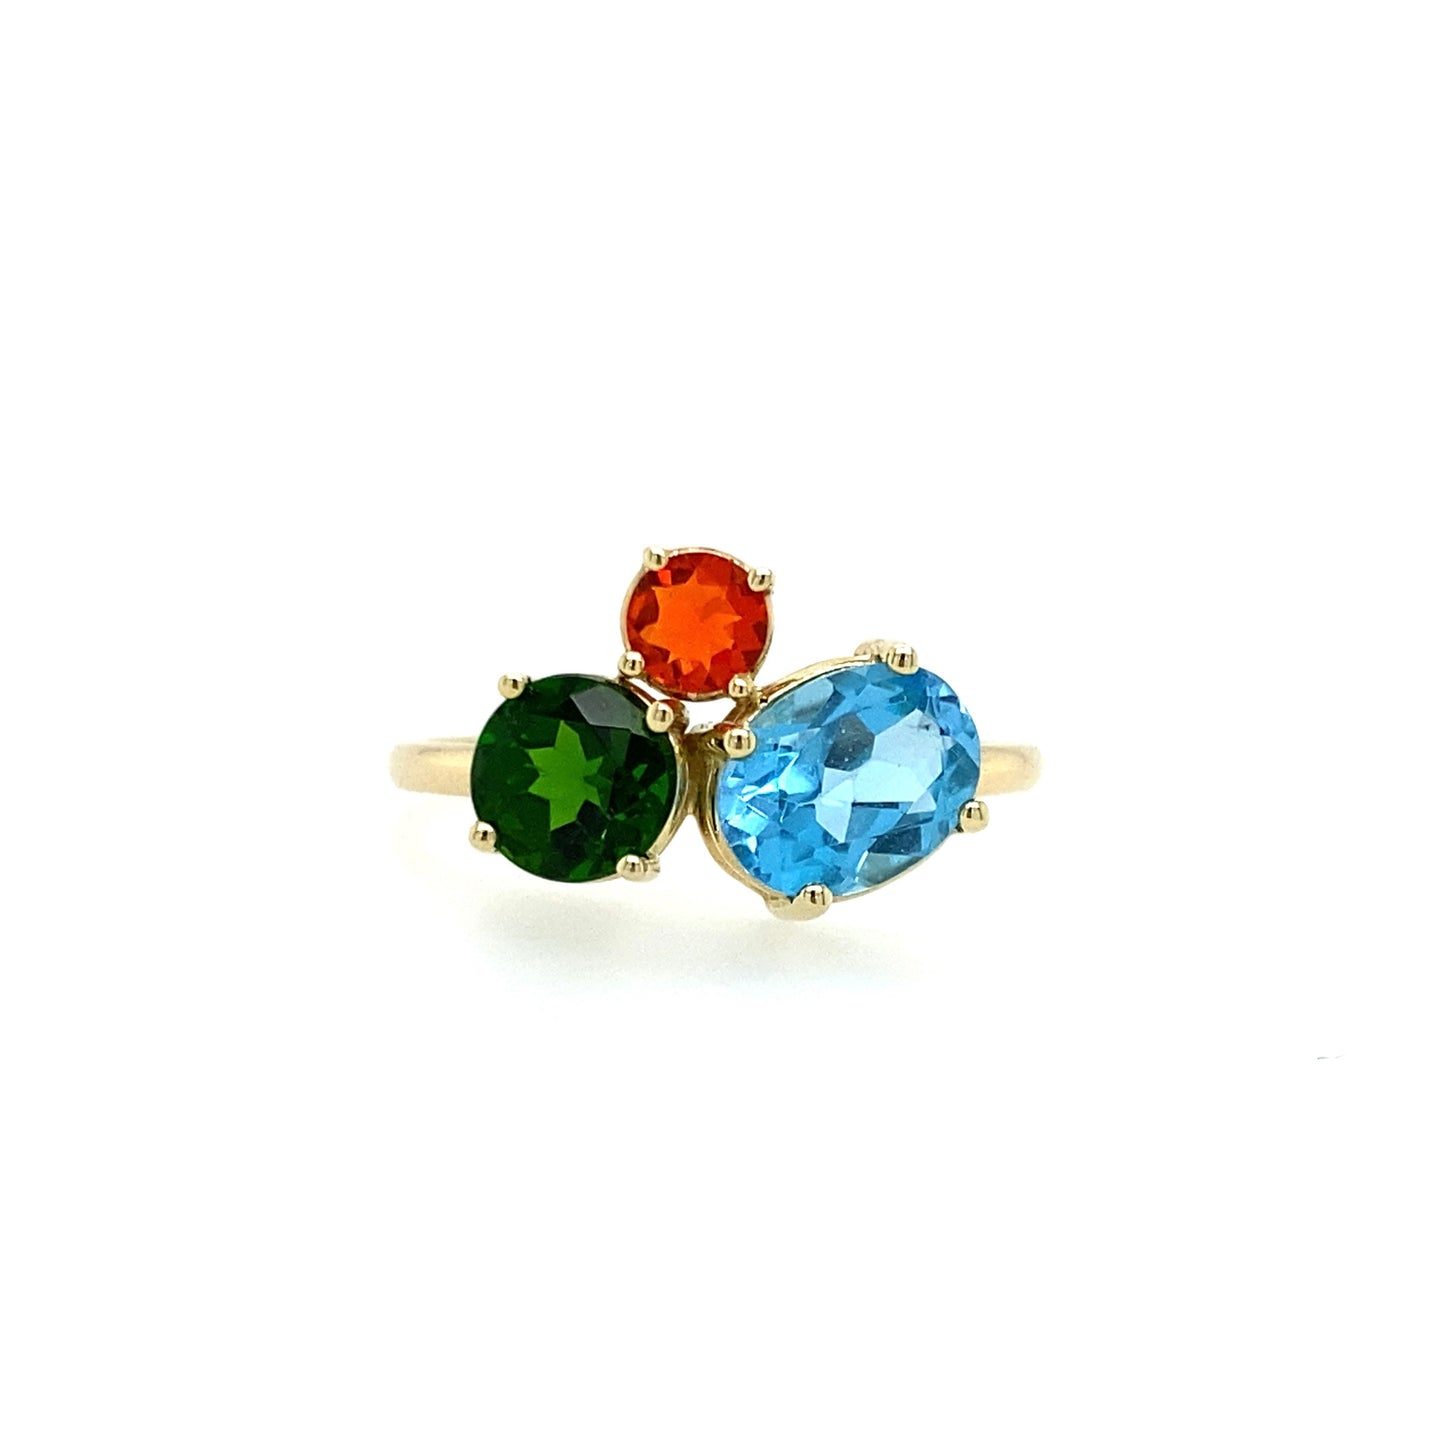 Mosaic ring Chrome Diopside, Fire Opal and Blue Topaz in 14k yellow gold